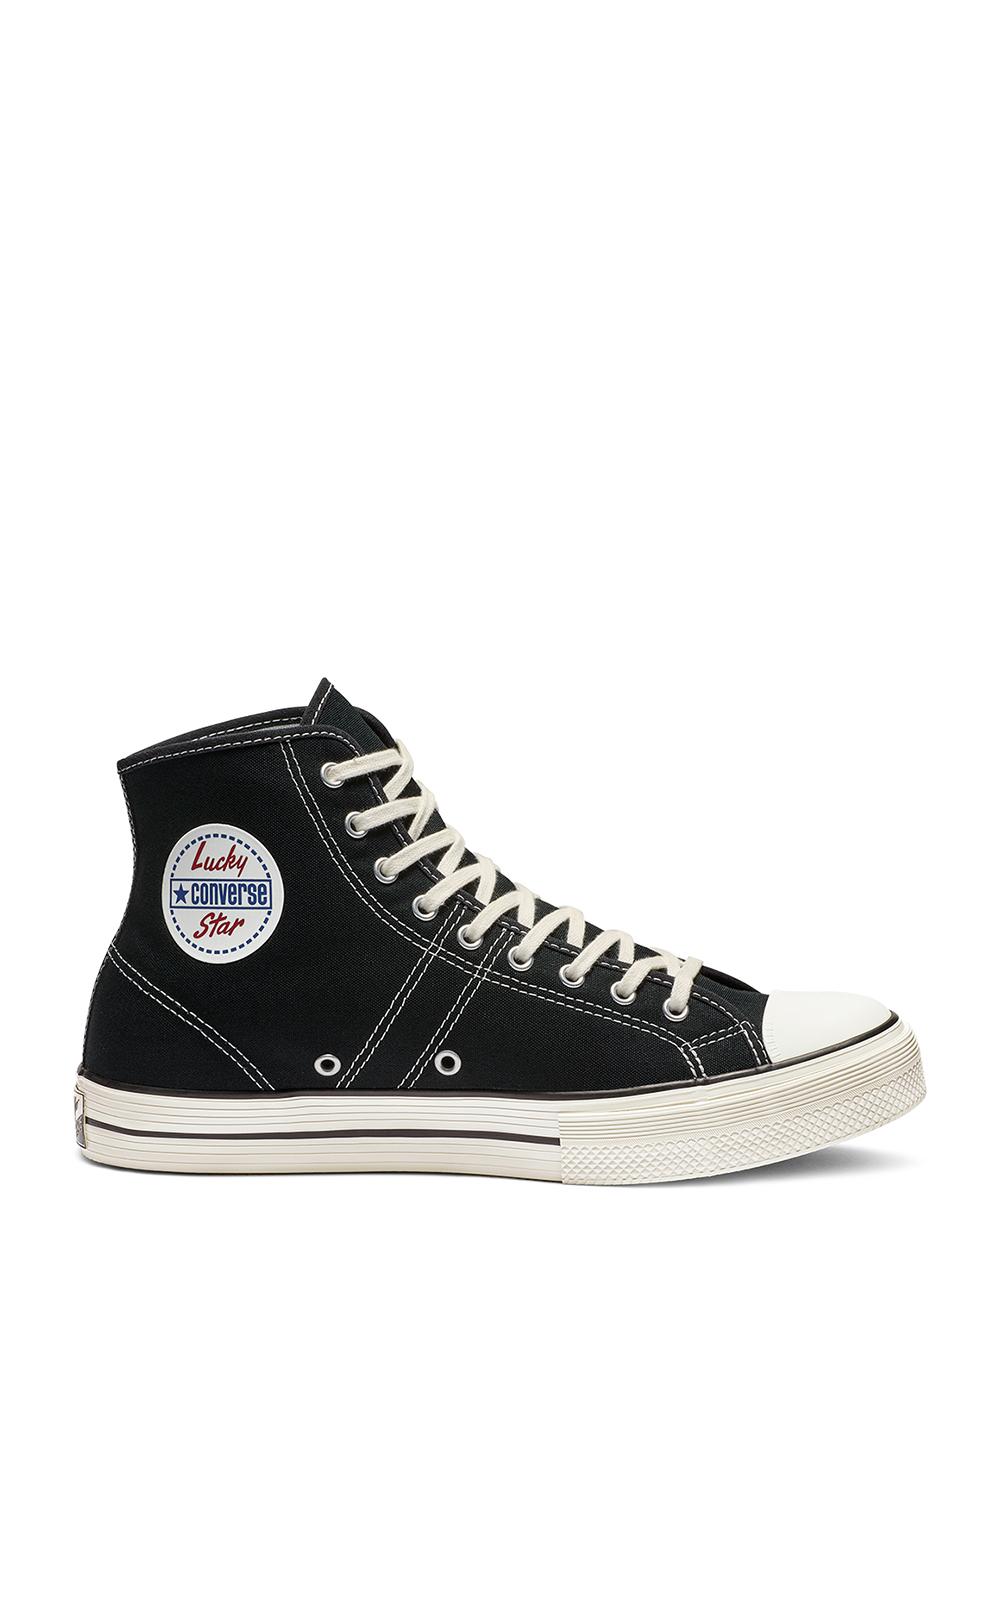 Converse Canvas in Black for Men - Lyst